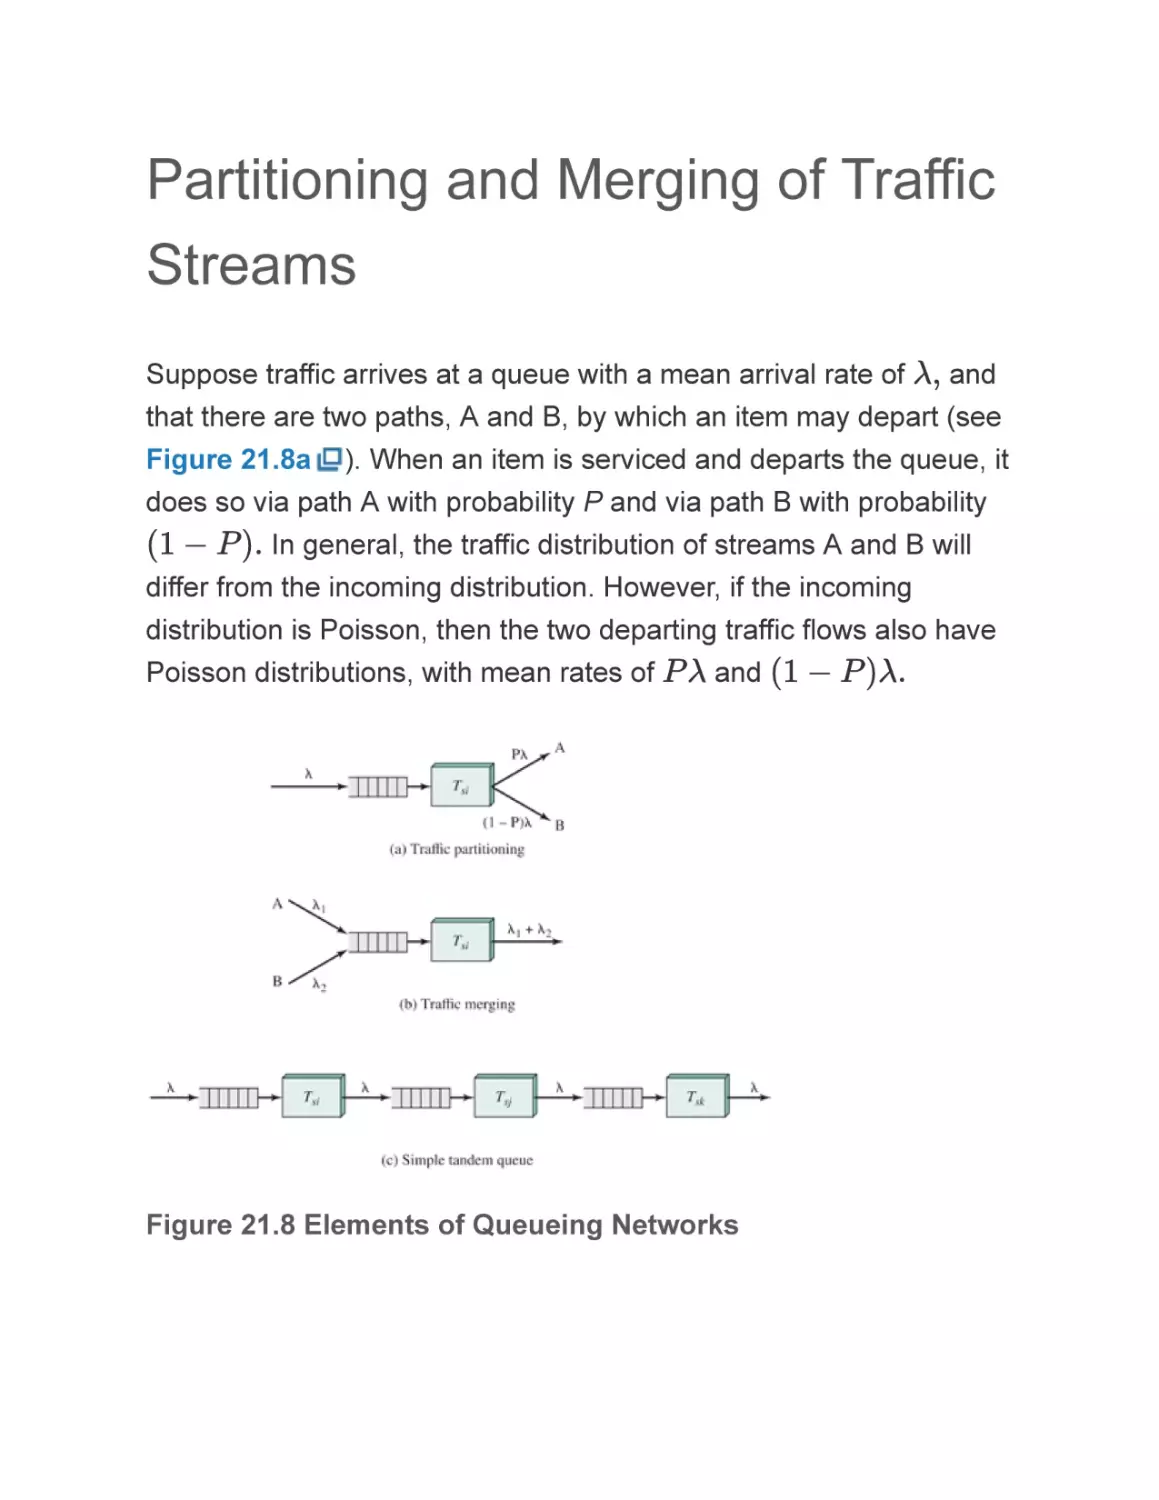 Partitioning and Merging of Traffic Streams